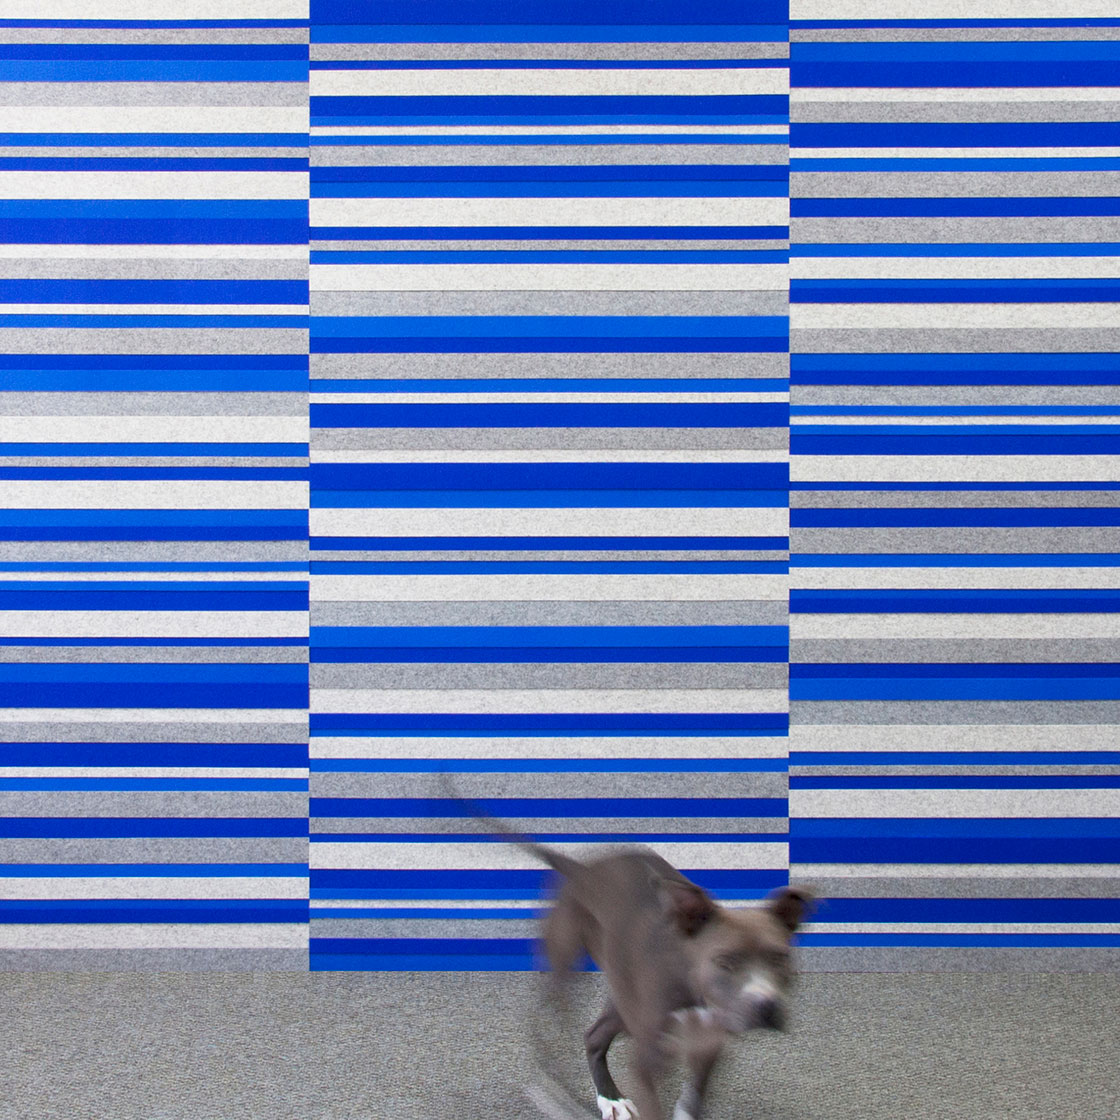 Wool felt wall with a pattern of offset horizontal strips in various narrow sizes in blues and grays.